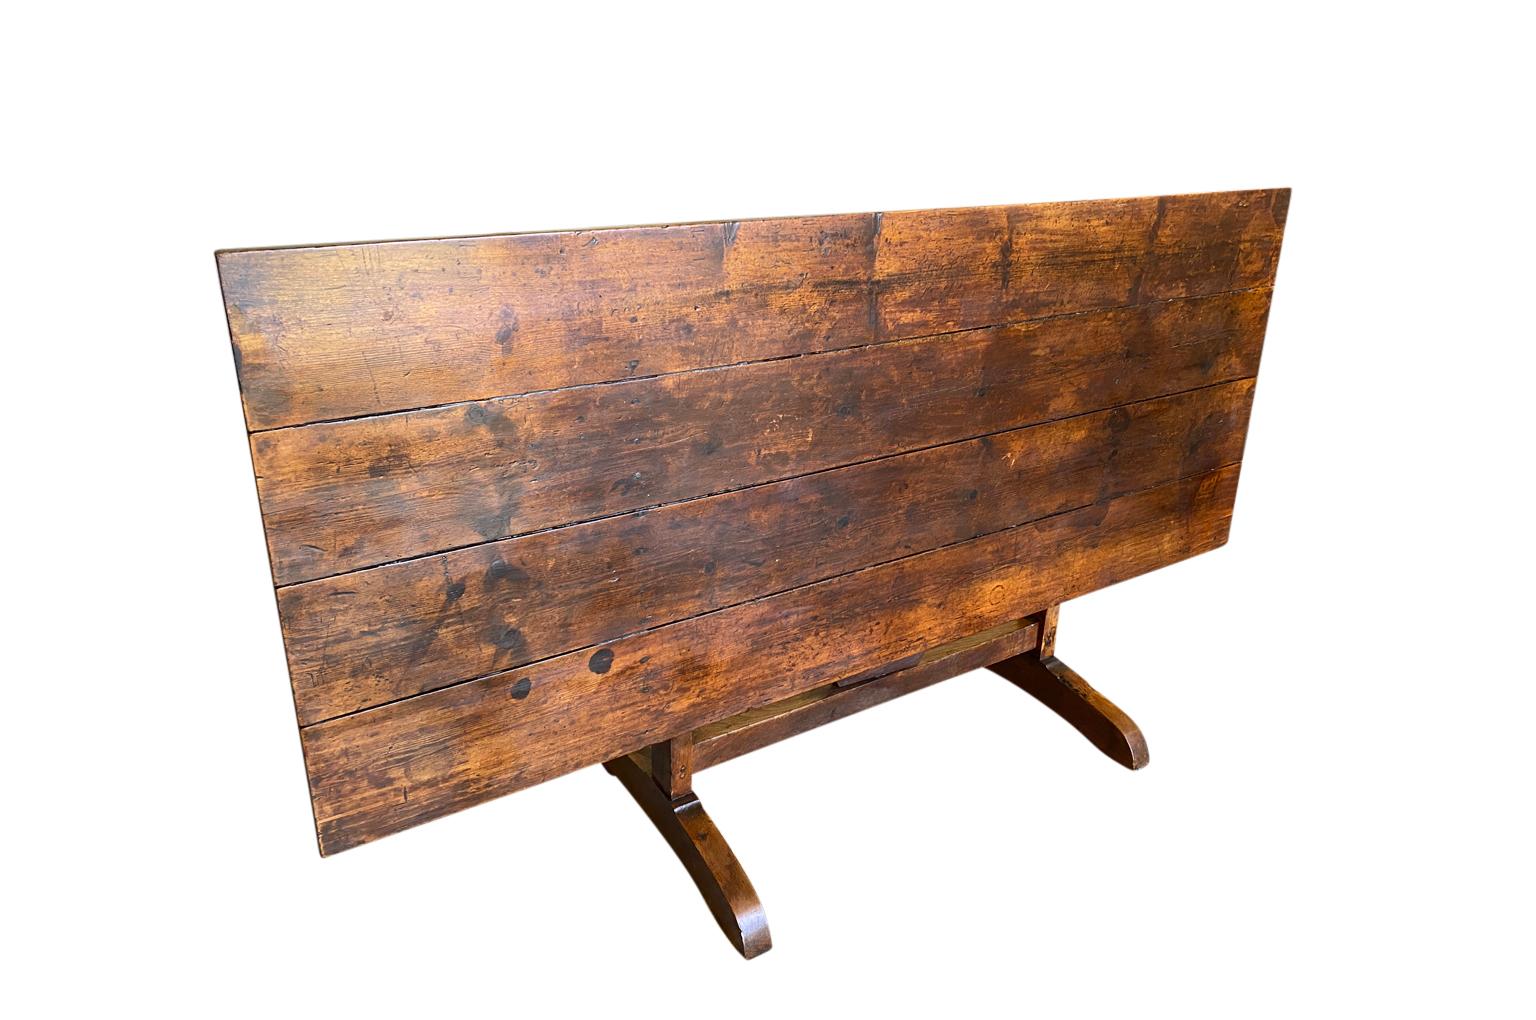 Exceptional and very rare 19th century Table Vigneron - Wine tasting Table from the Provence region of France. This very unique Wine Tasting Table is of an unusual rectangular shape, soundly constructed from richly stained pine. Sensational patina.